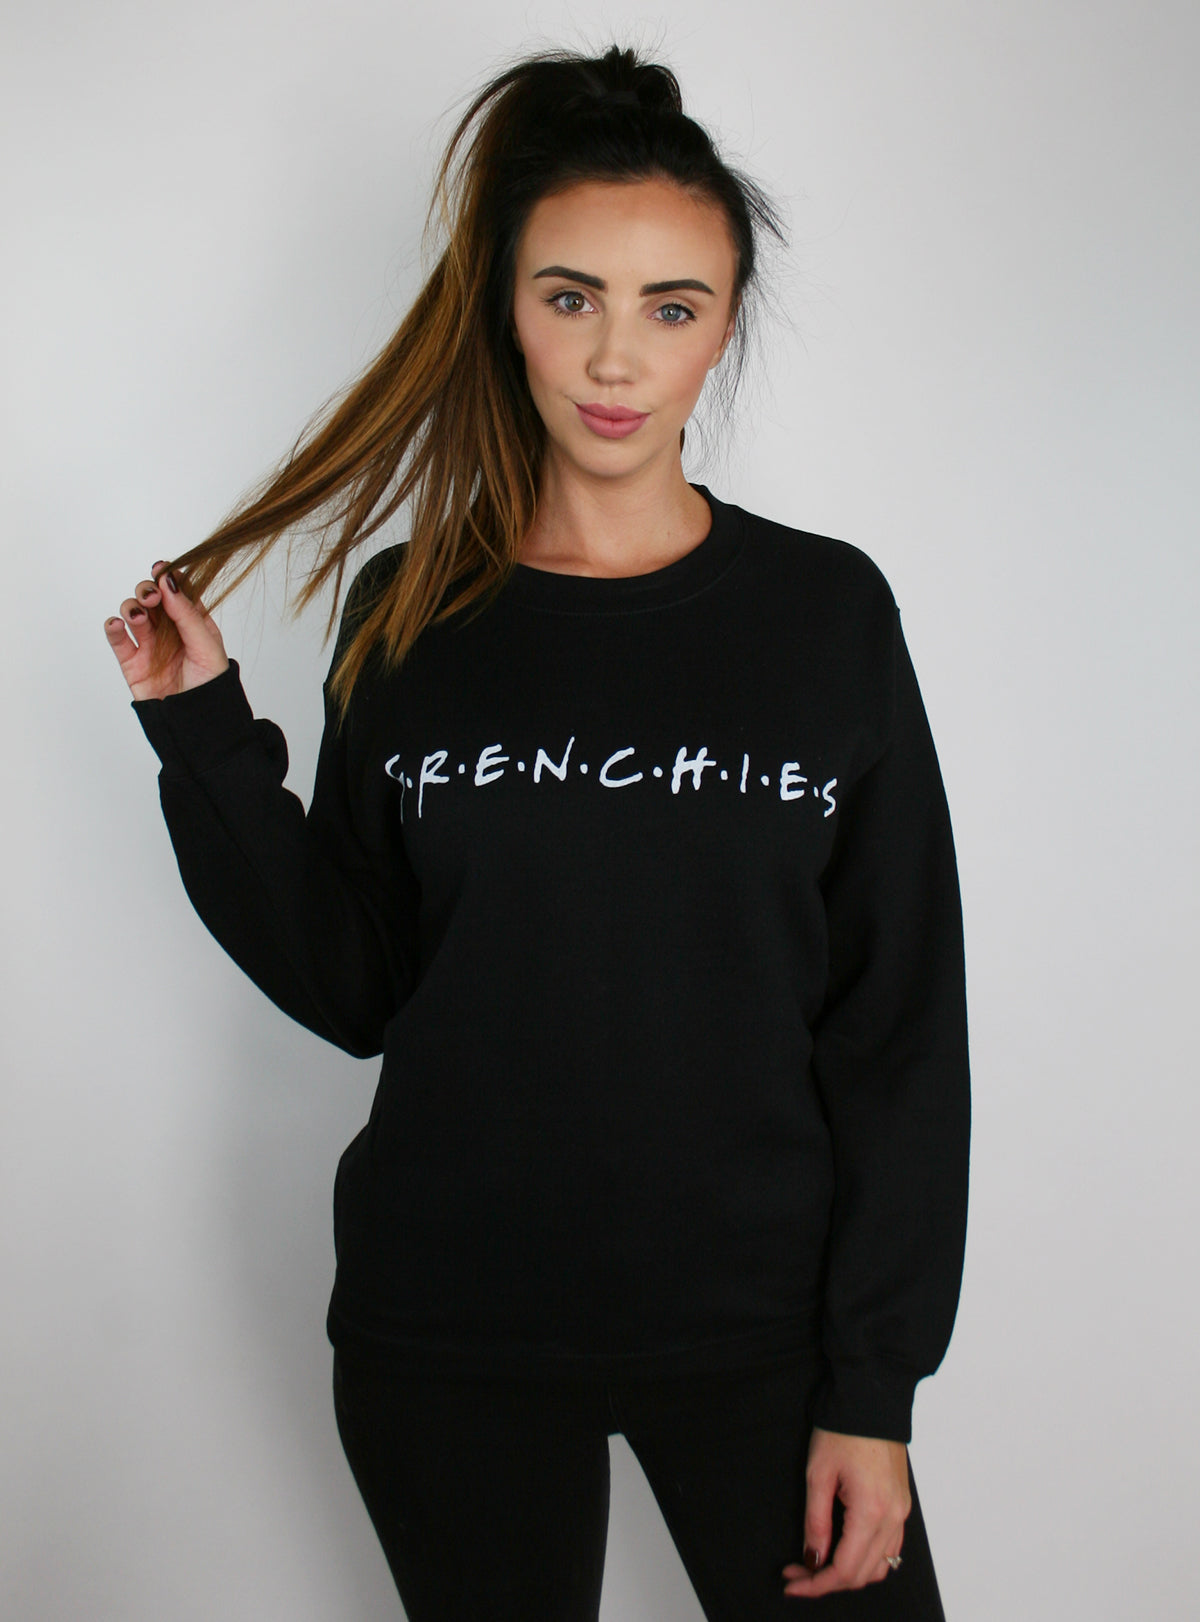 Frenchies Friends Long Sleeve Tee